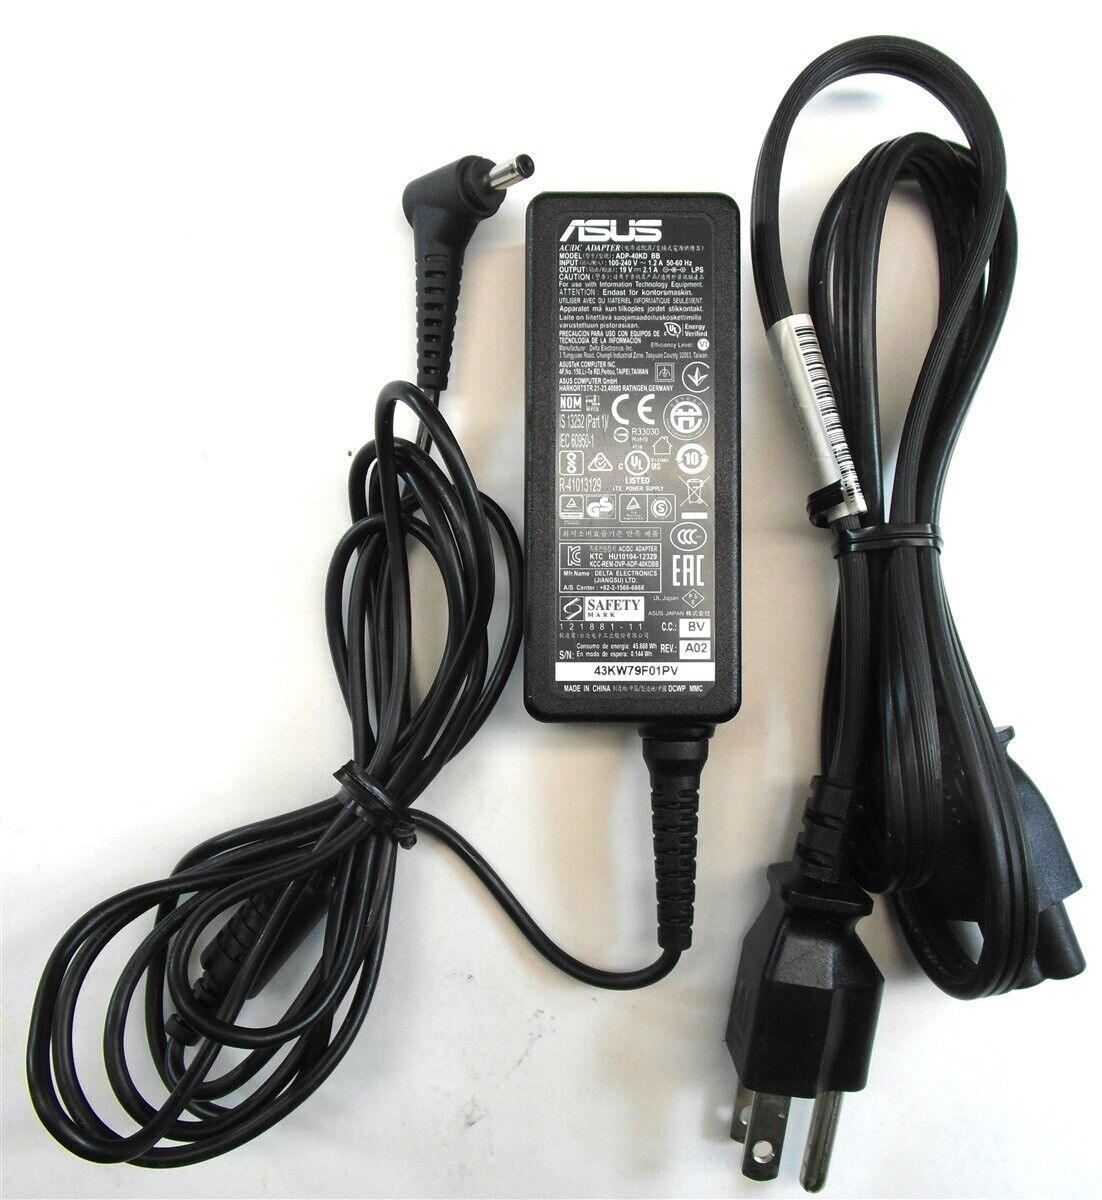 Genuine Asus Laptop Charger AC Adapter Power Supply ADP-40KD BB C.C BV 4.0mm Tip